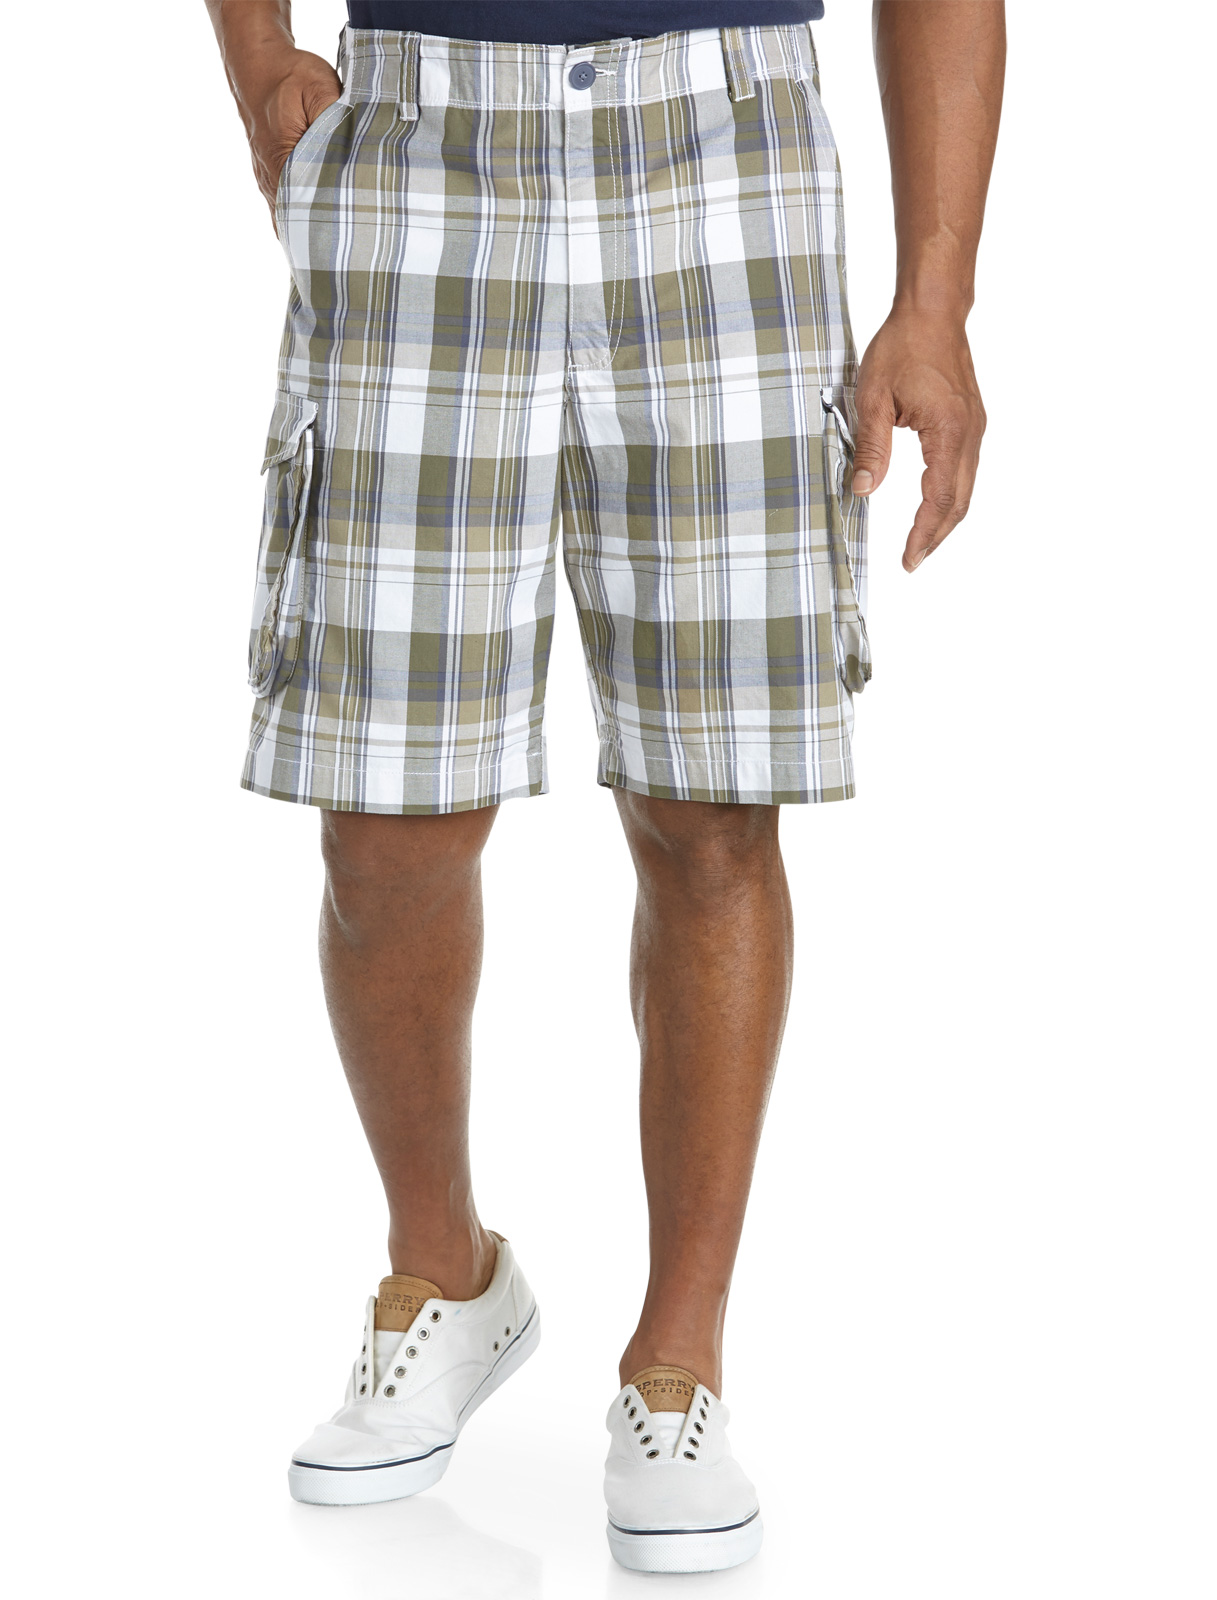 True Nation Men's Big and Tall Plaid Cargo Shorts